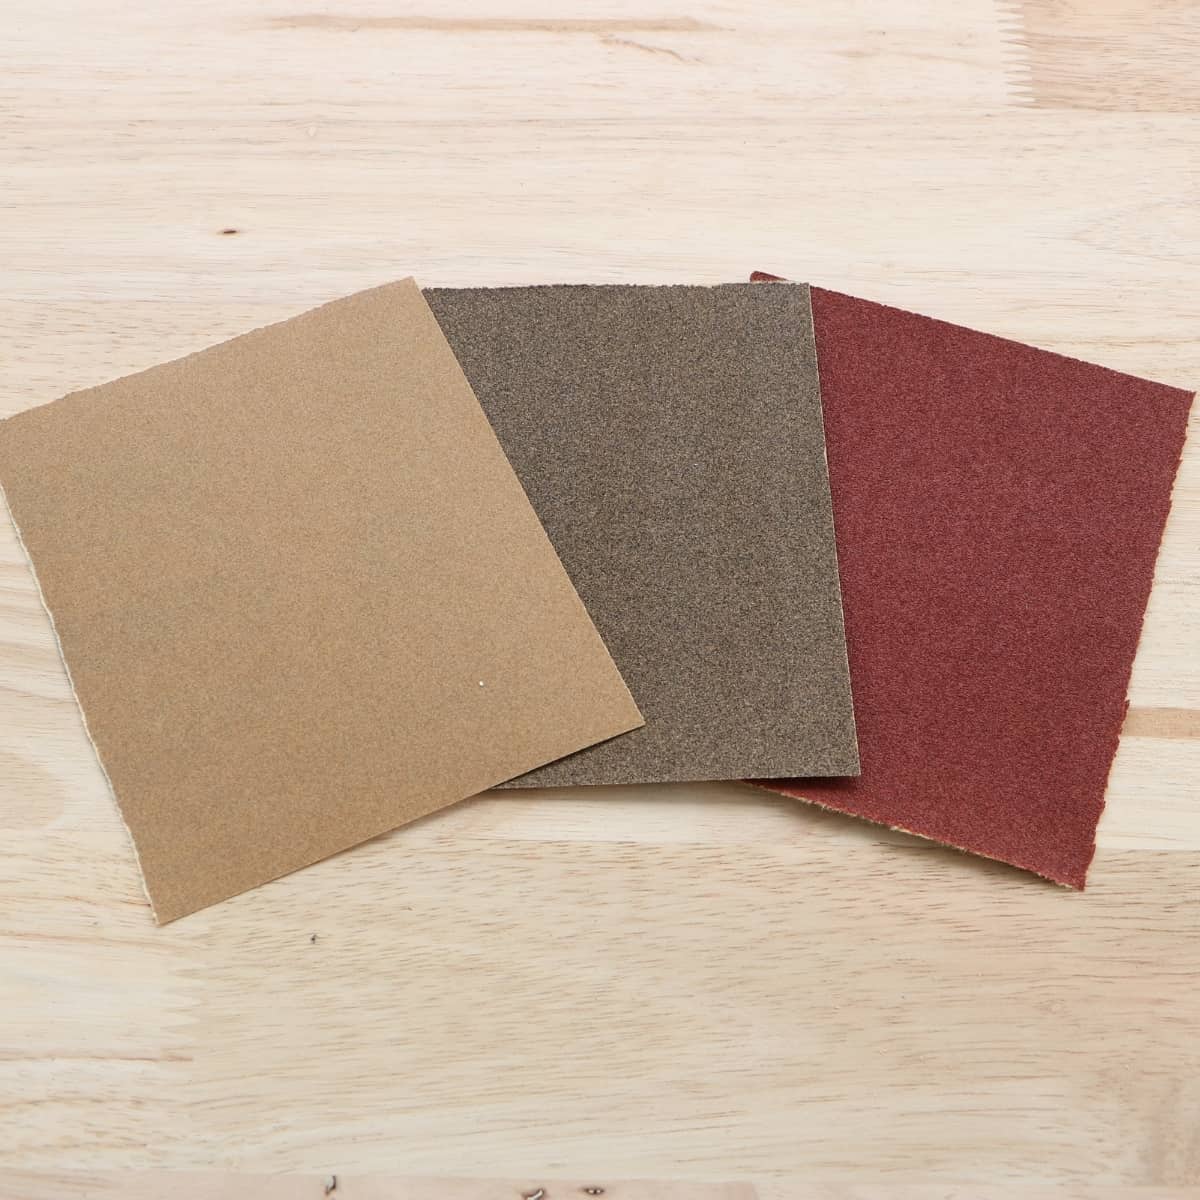 squares of sandpaper on wood surface